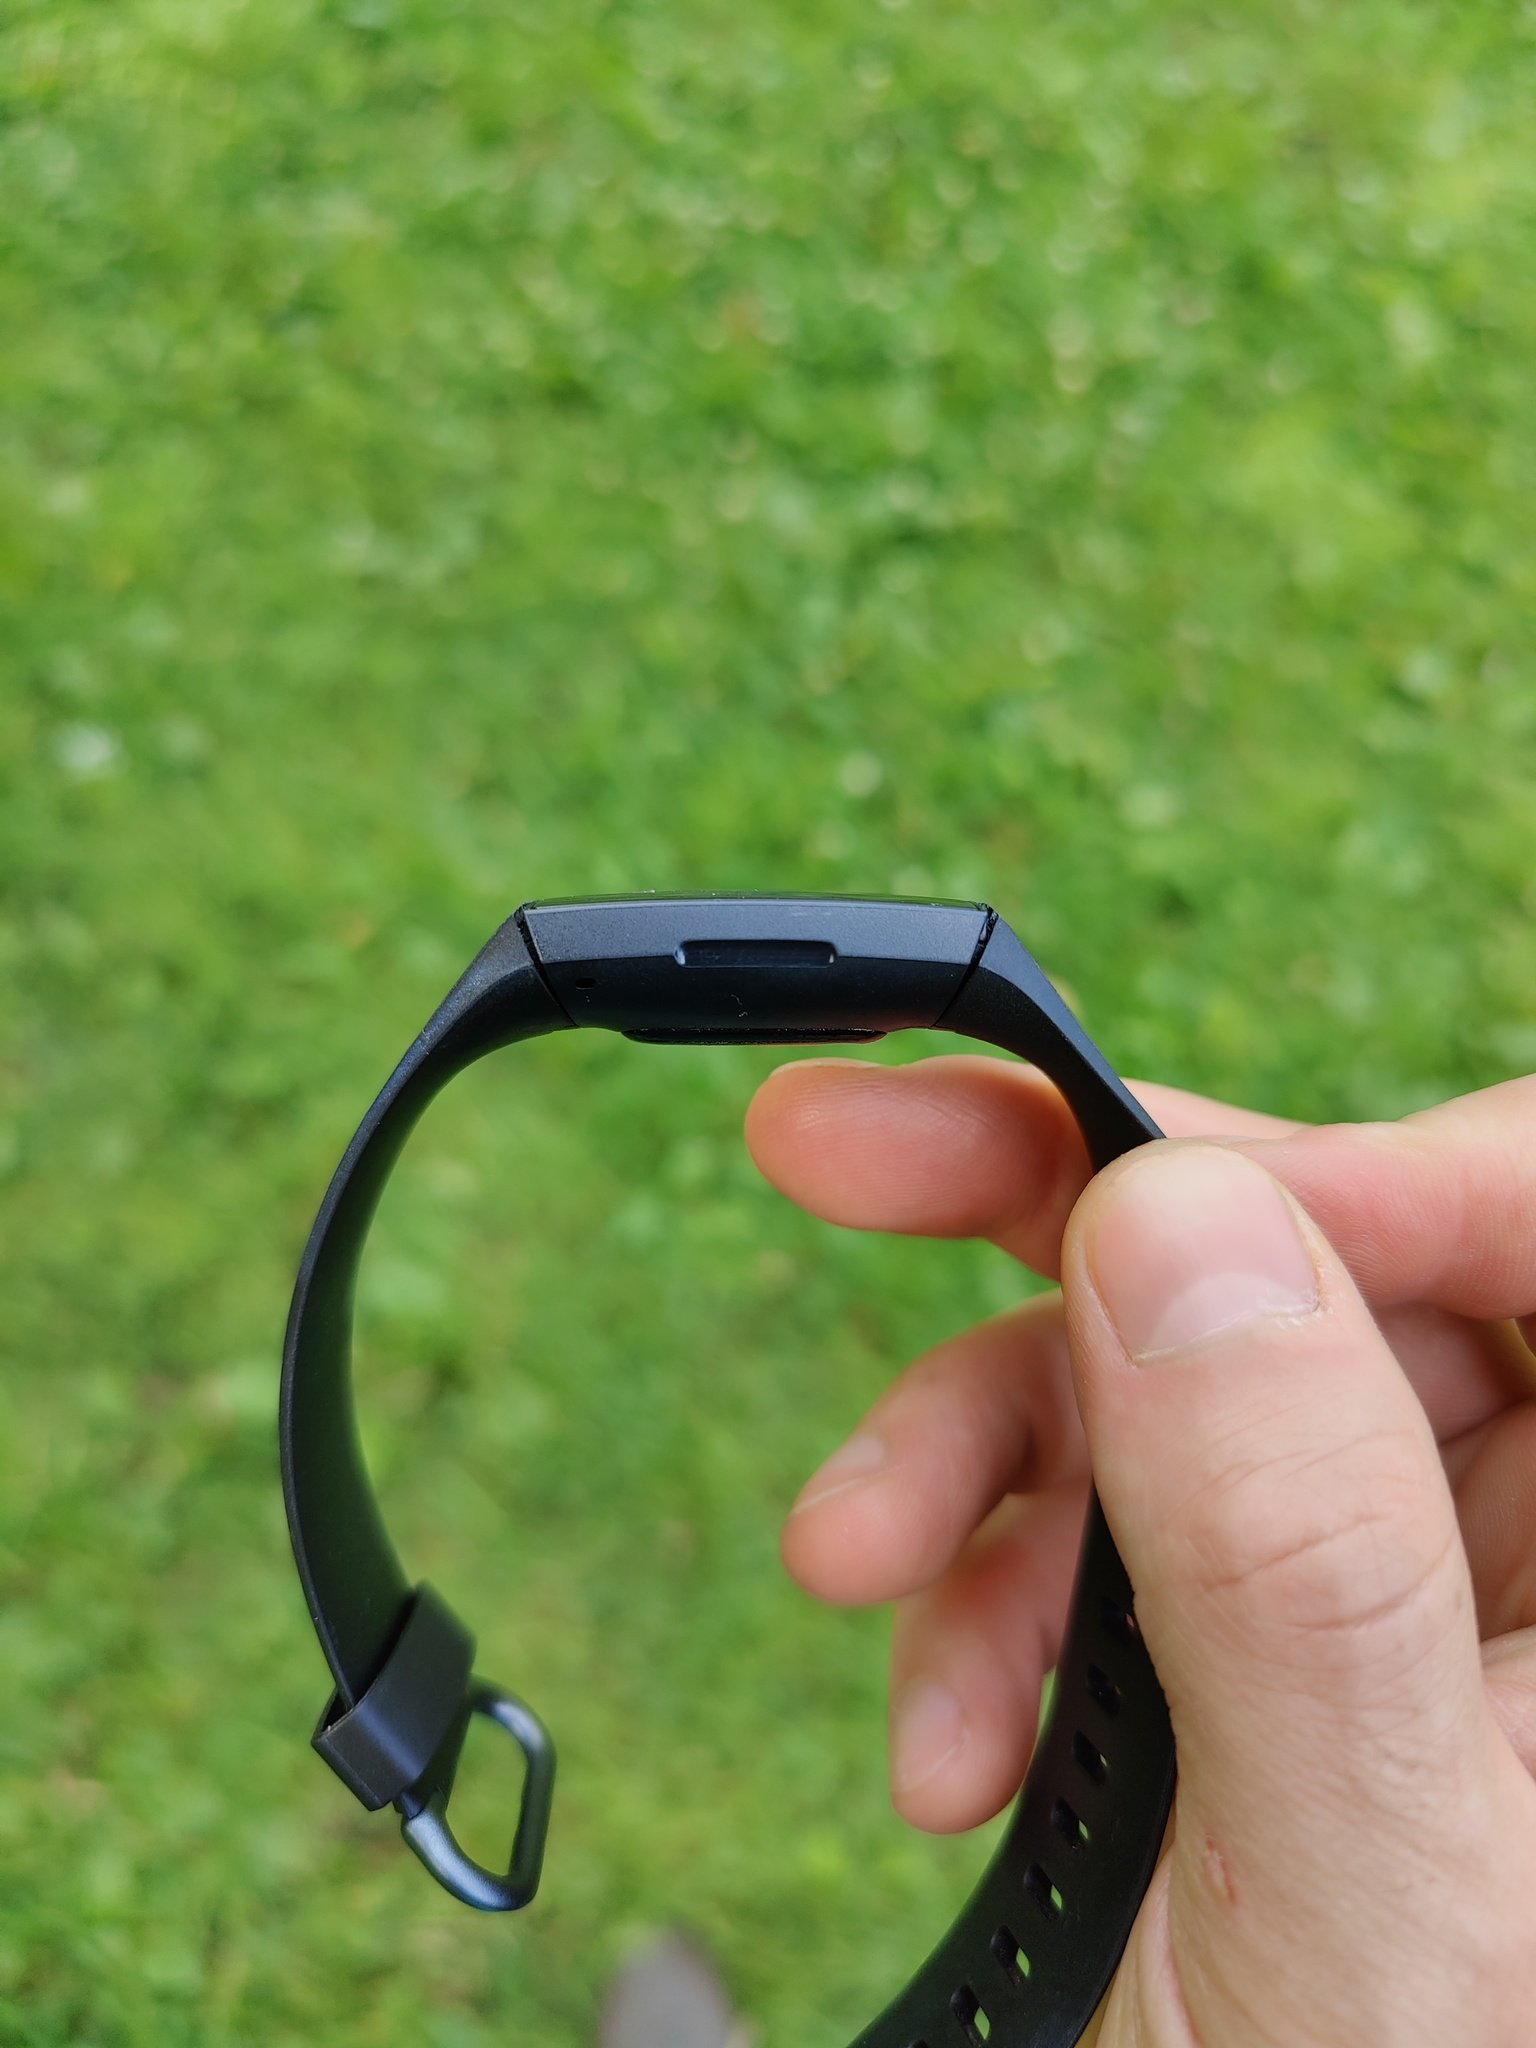 fitbit charge 4 gap